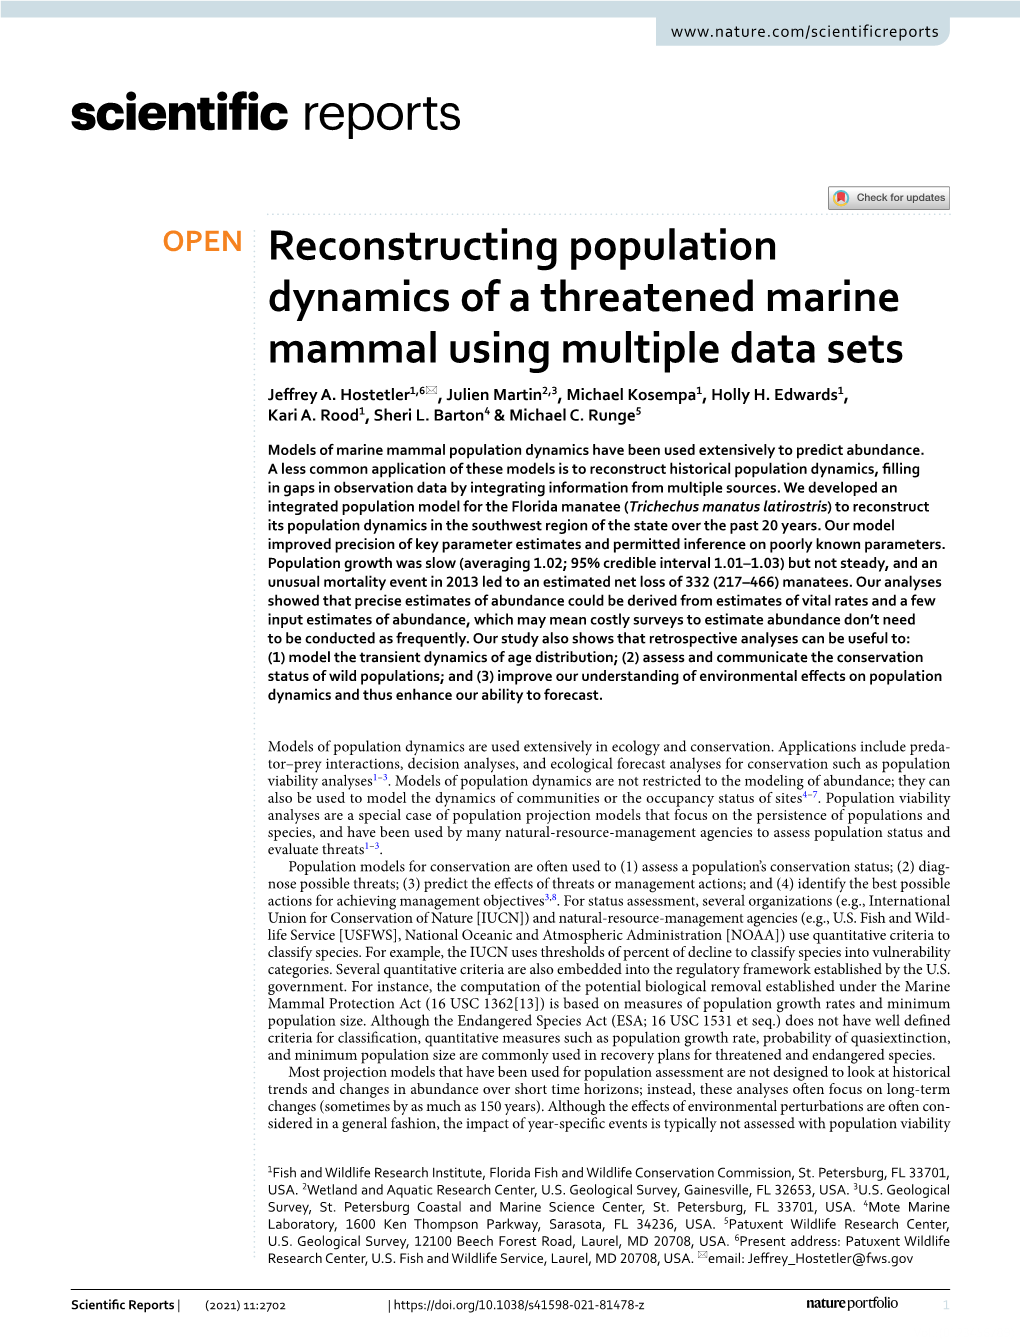 Reconstructing Population Dynamics of a Threatened Marine Mammal Using Multiple Data Sets Jefrey A